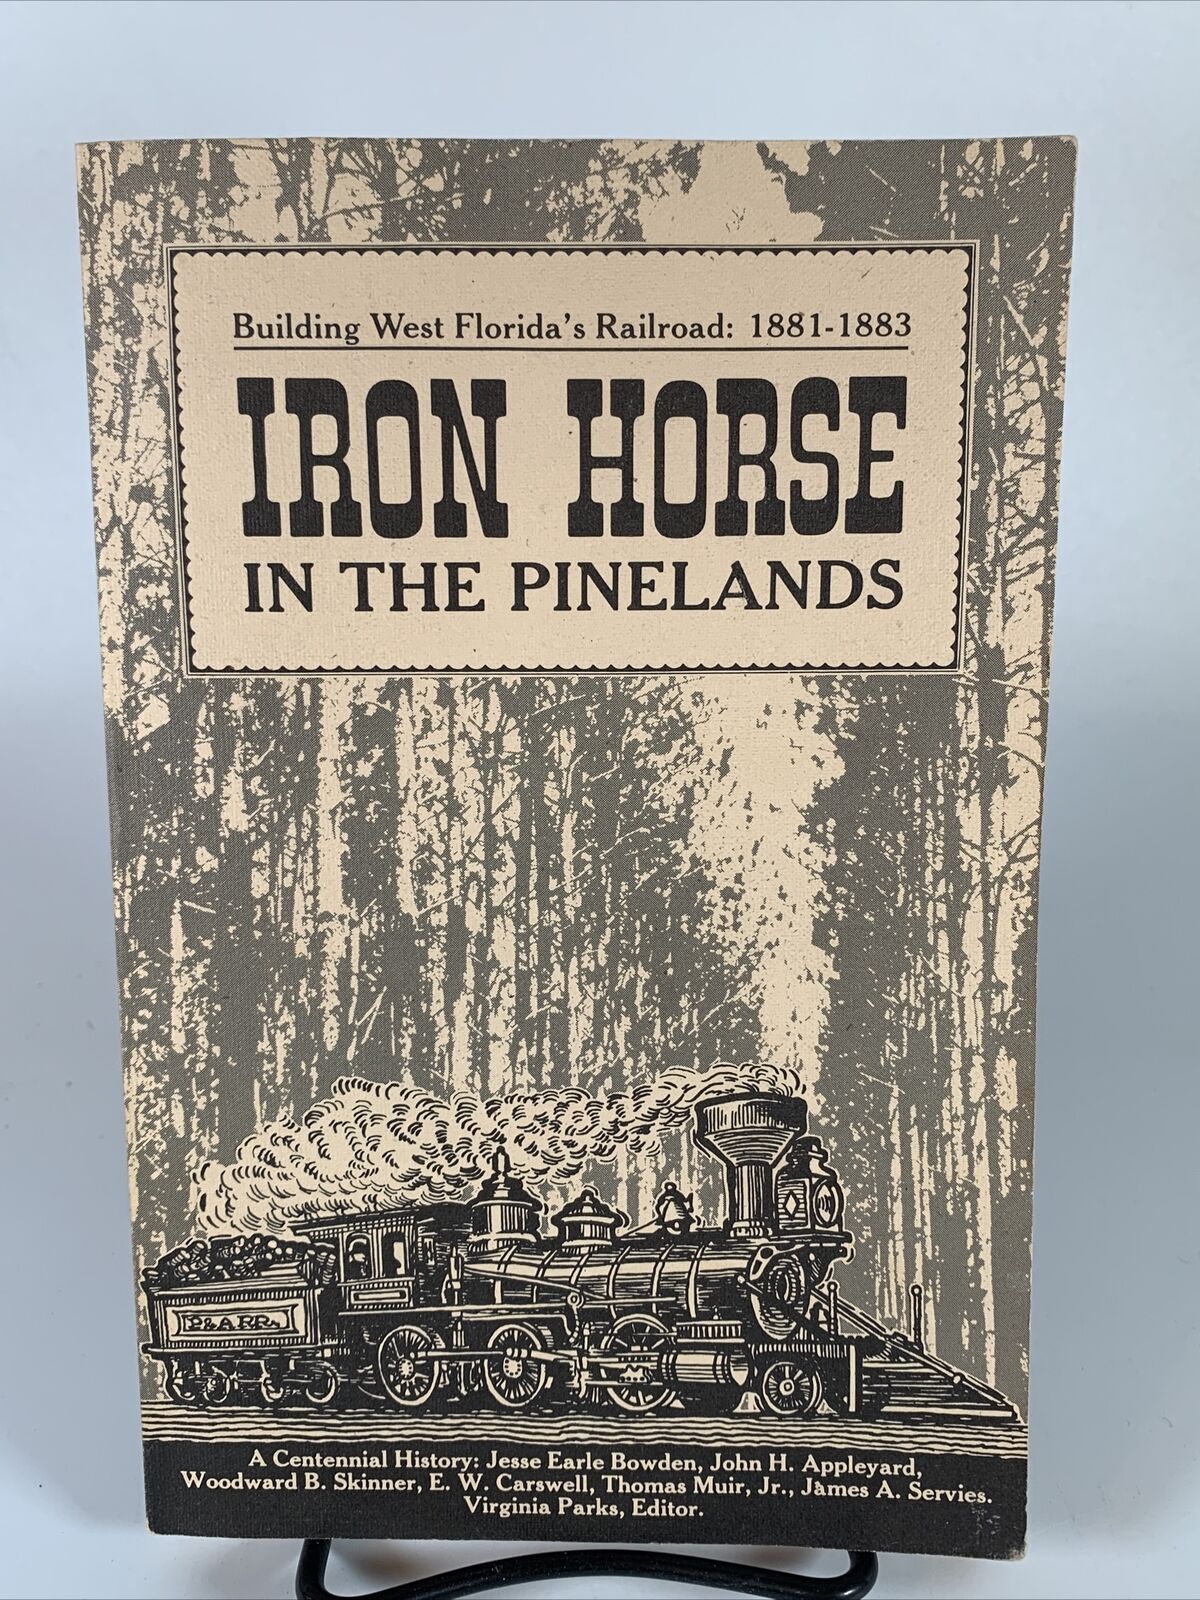 1991 IRON HORSE IN THE PINELANDS Book WEST FLORIDA's RAILROAD 1881-1883